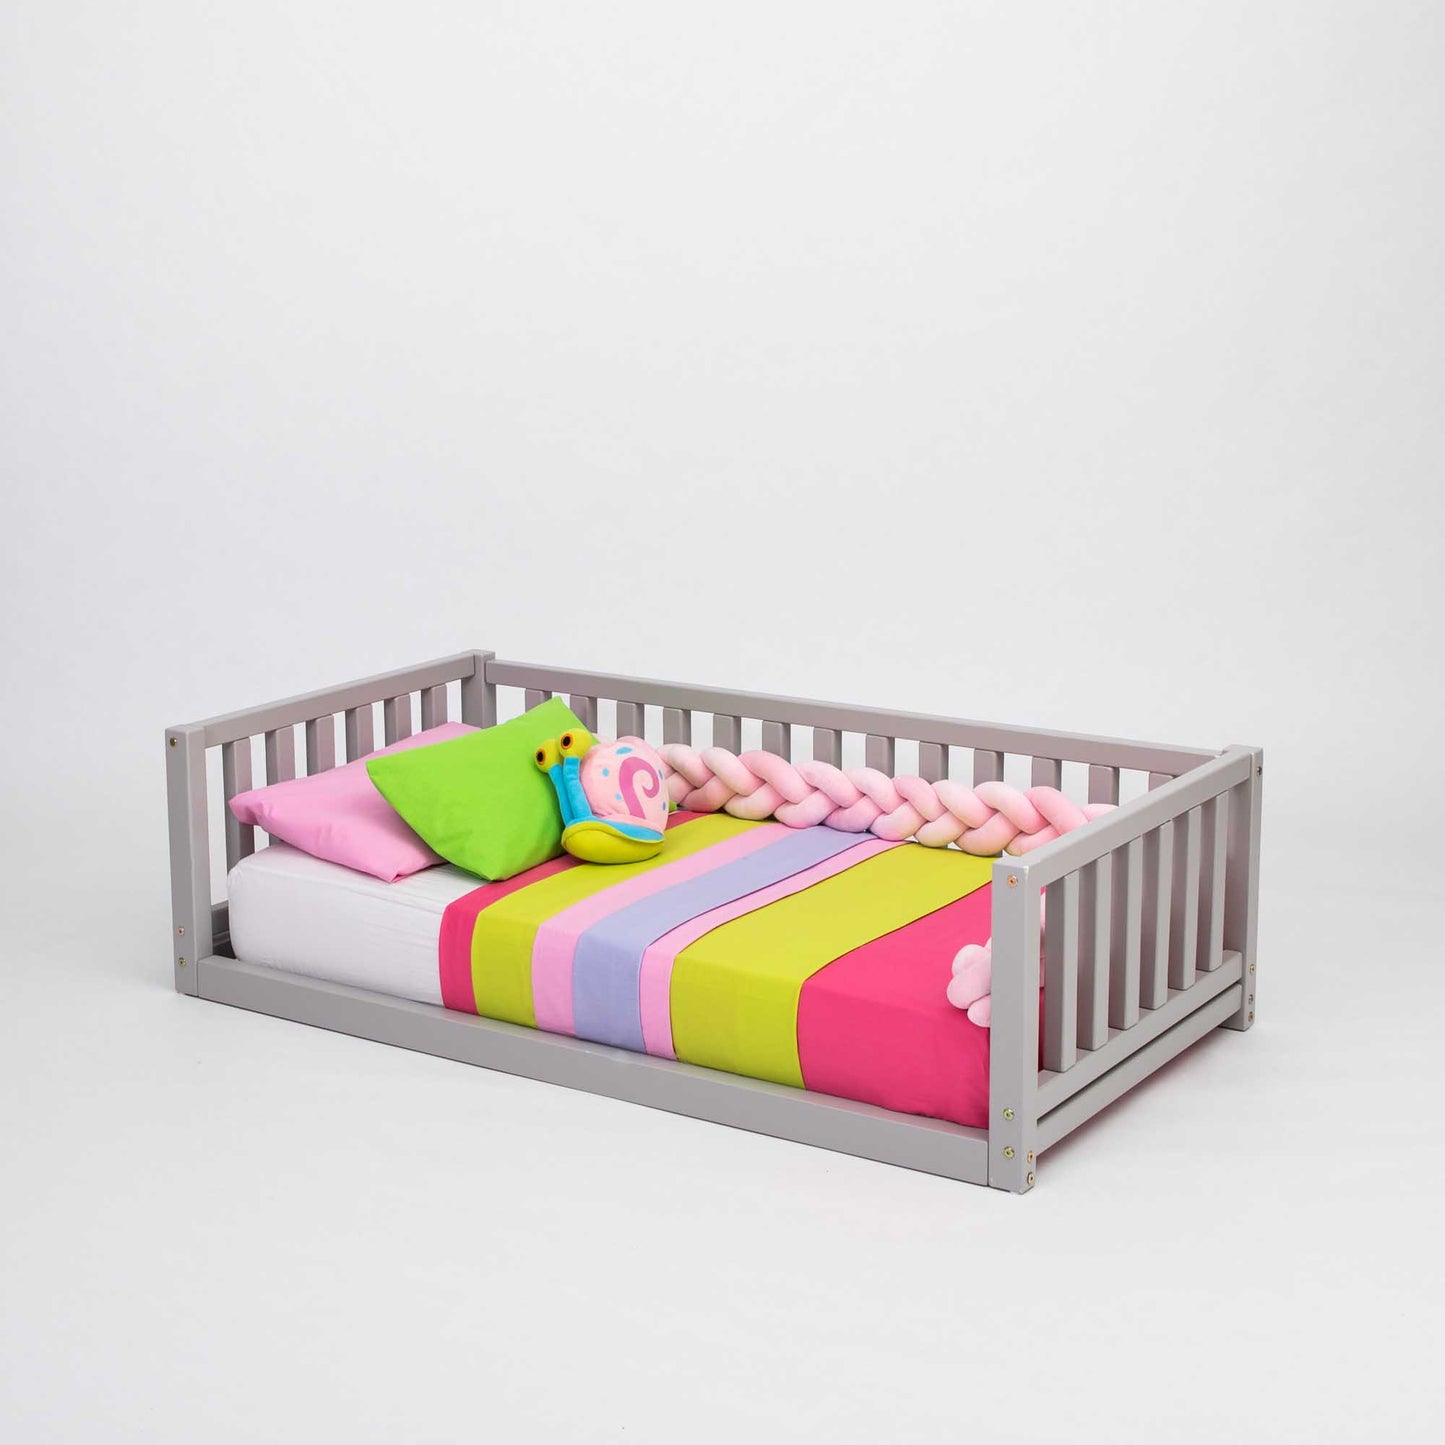 A Sweet Home From Wood 2-in-1 toddler bed on legs with a 3-sided vertical rail made of solid pine or birch wood, with a colorful blanket on the floor-level bed.